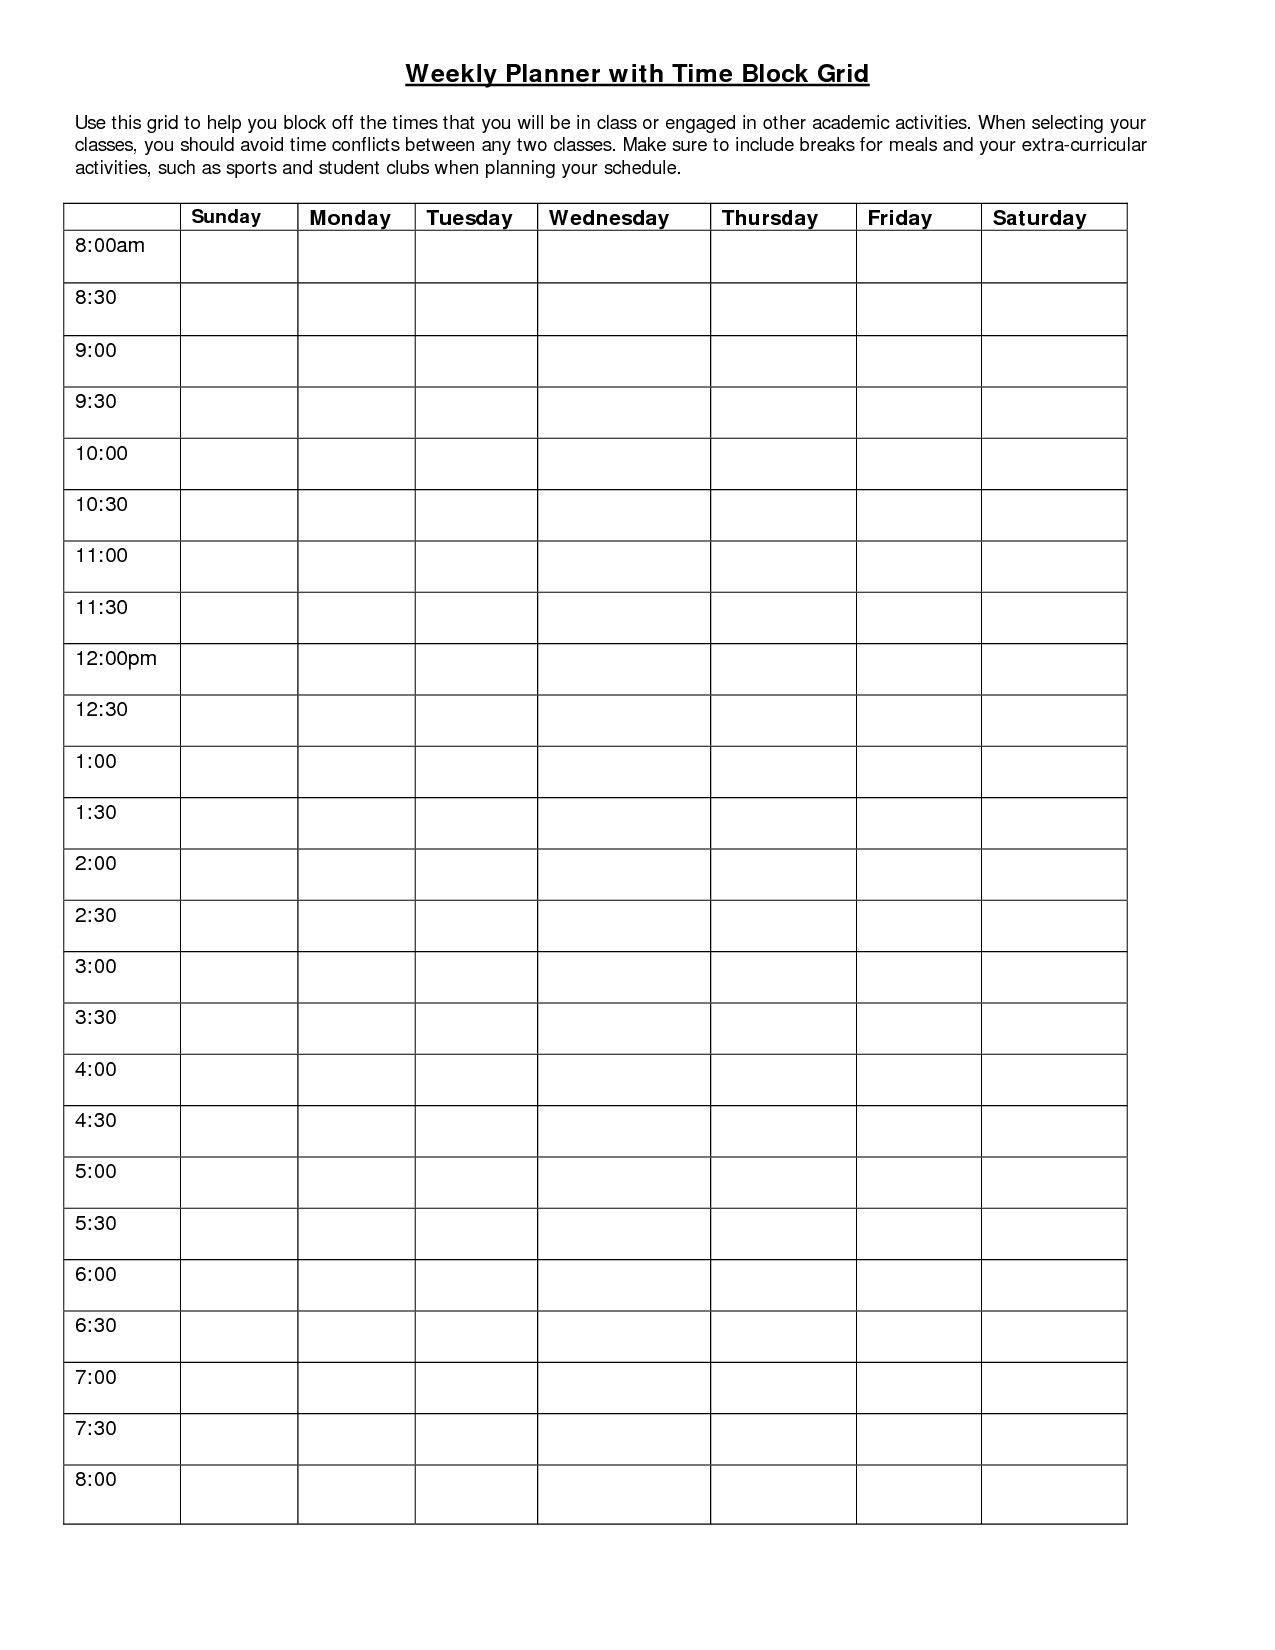 Weekly 24 Hour Planner Awesome 24 Hour Daily Planner Template 7 Day 7 Day 24 Hour Calendar Template